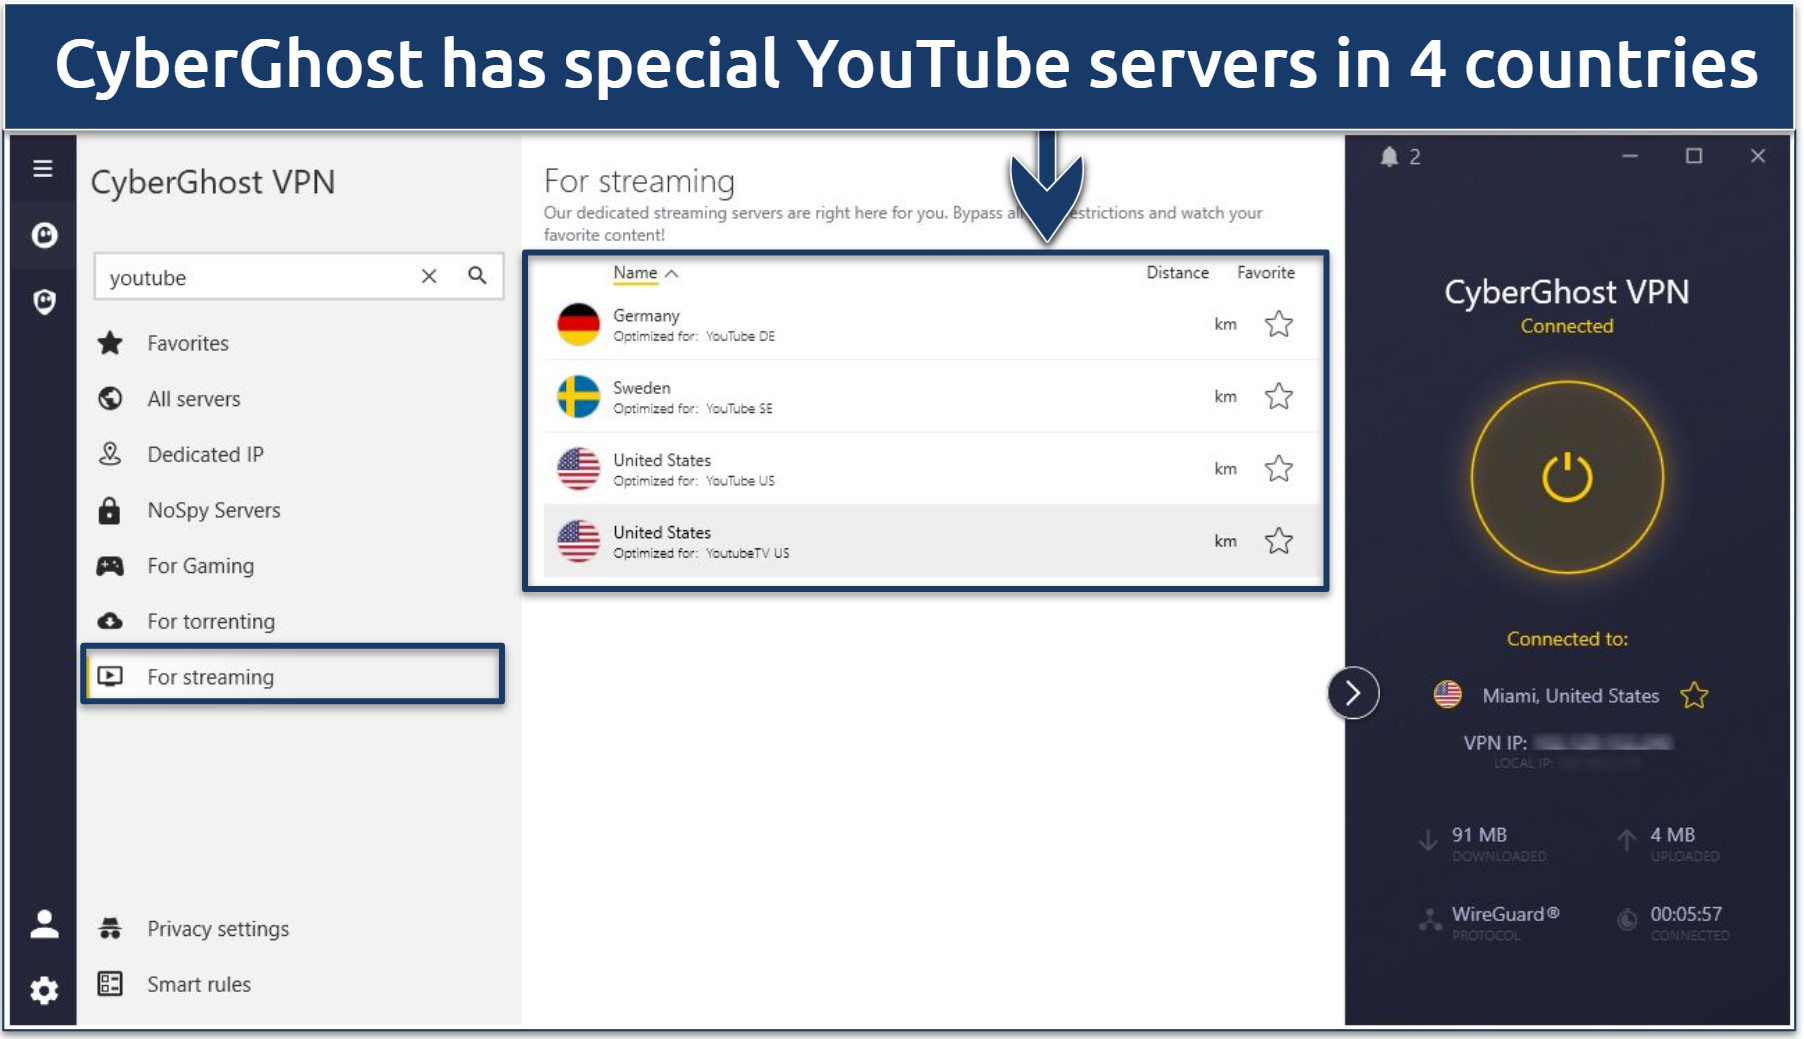 Screenshot of the CyberGhost interface showing its YouTube-optimized servers